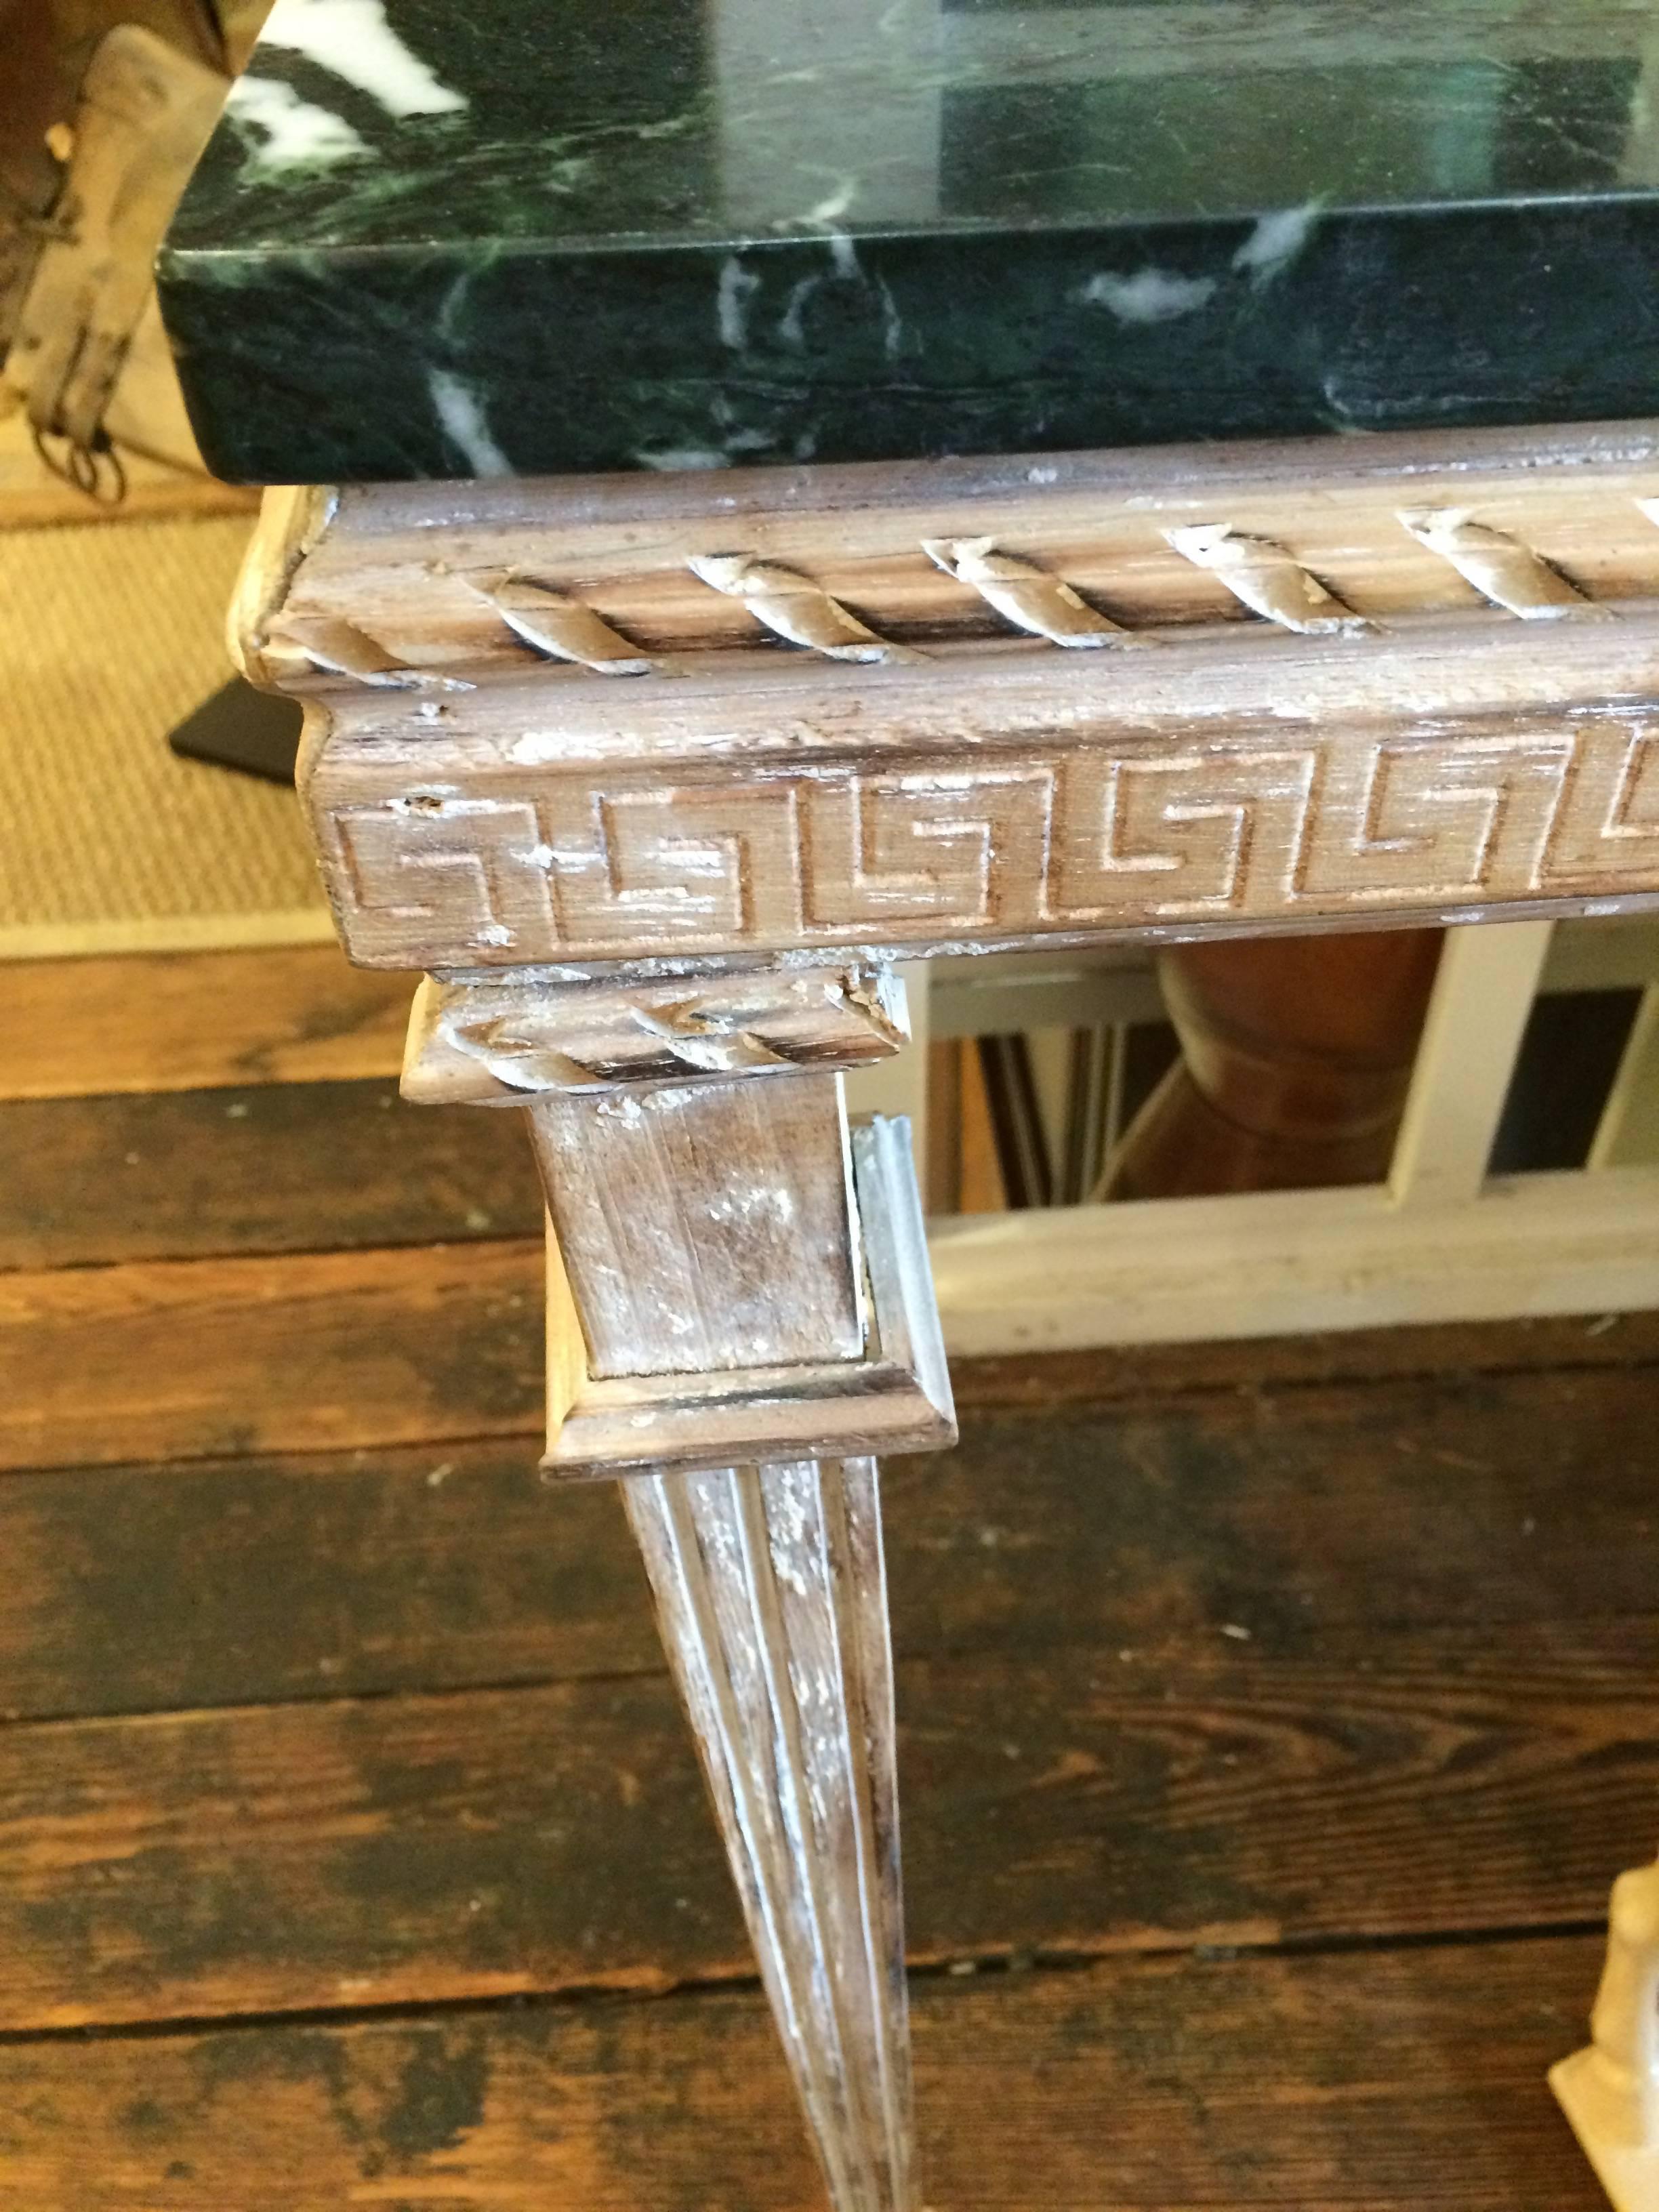 Lovely pair of console tables having carved distressed painted wood bases with a Greek key motife around the edge, topped with elegant black marble.

Note: Will sell individually.